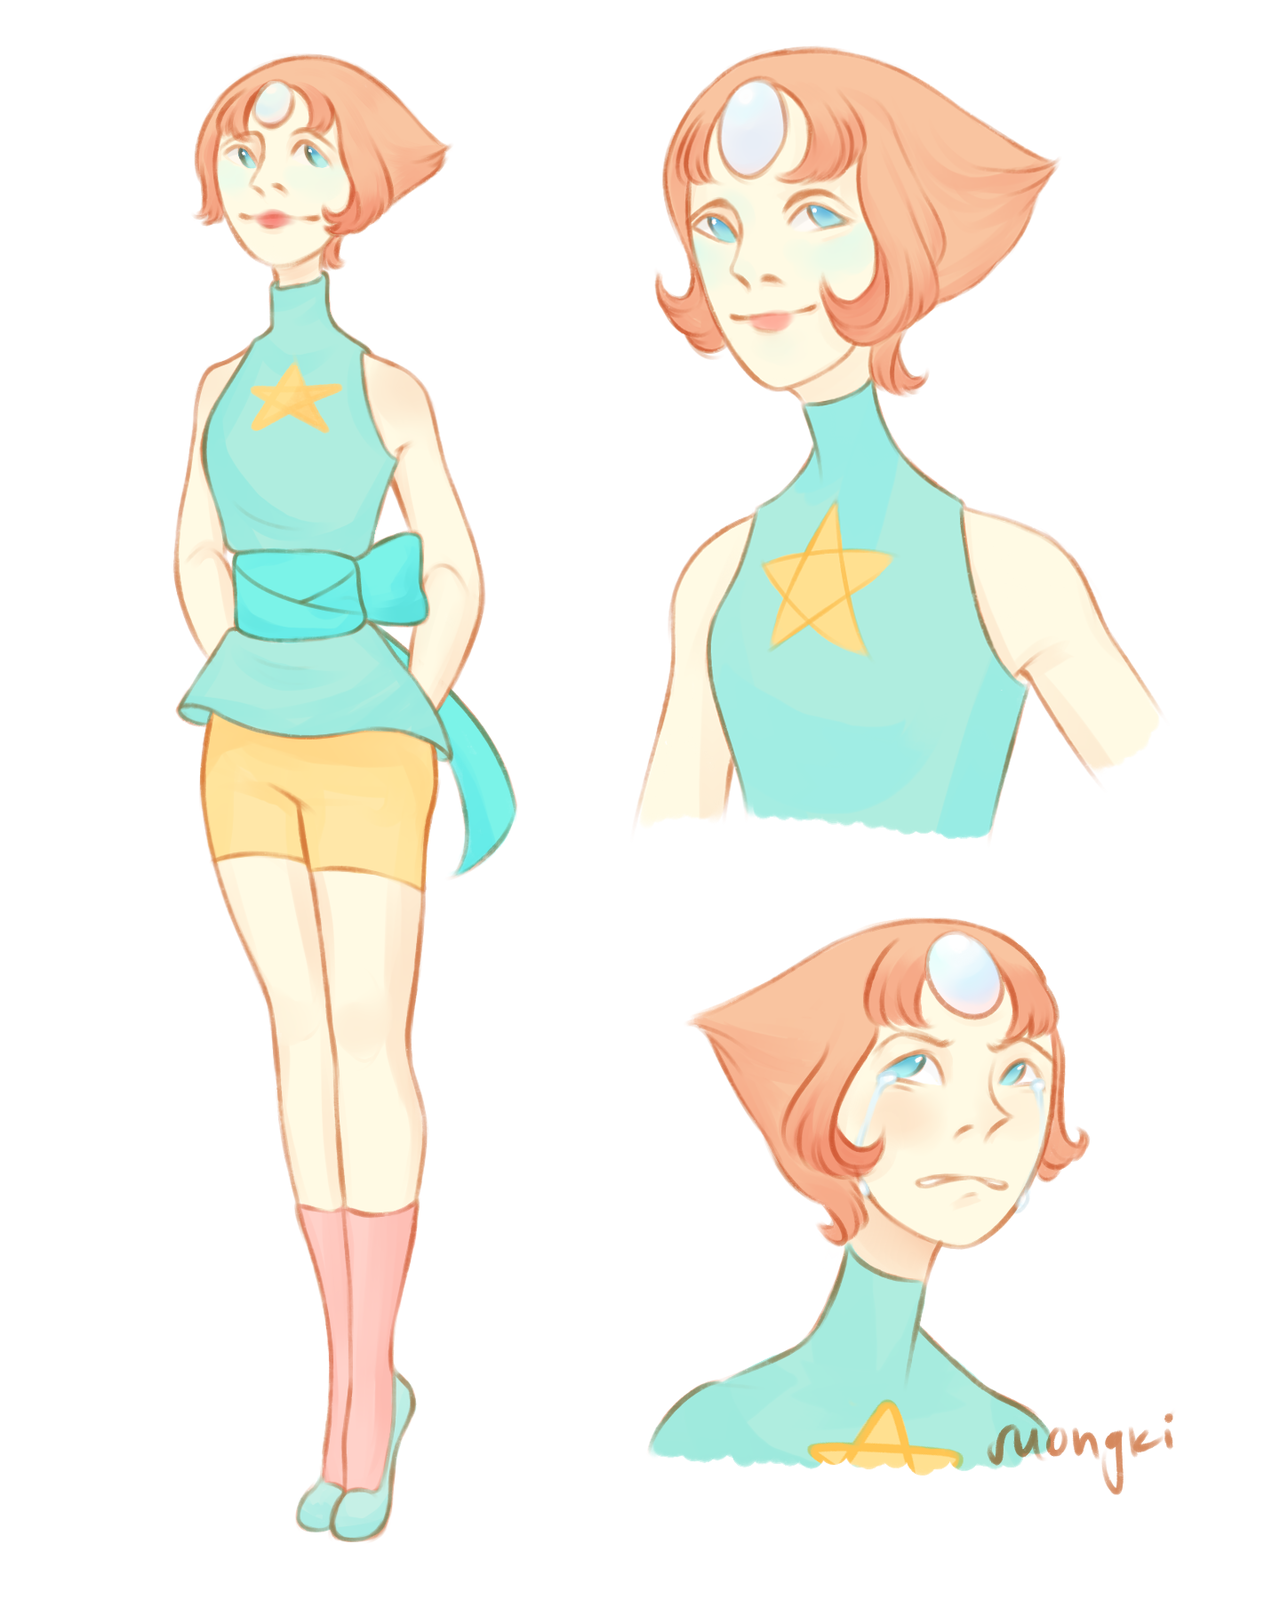 Pearl sketch dump in which she looks very different each time